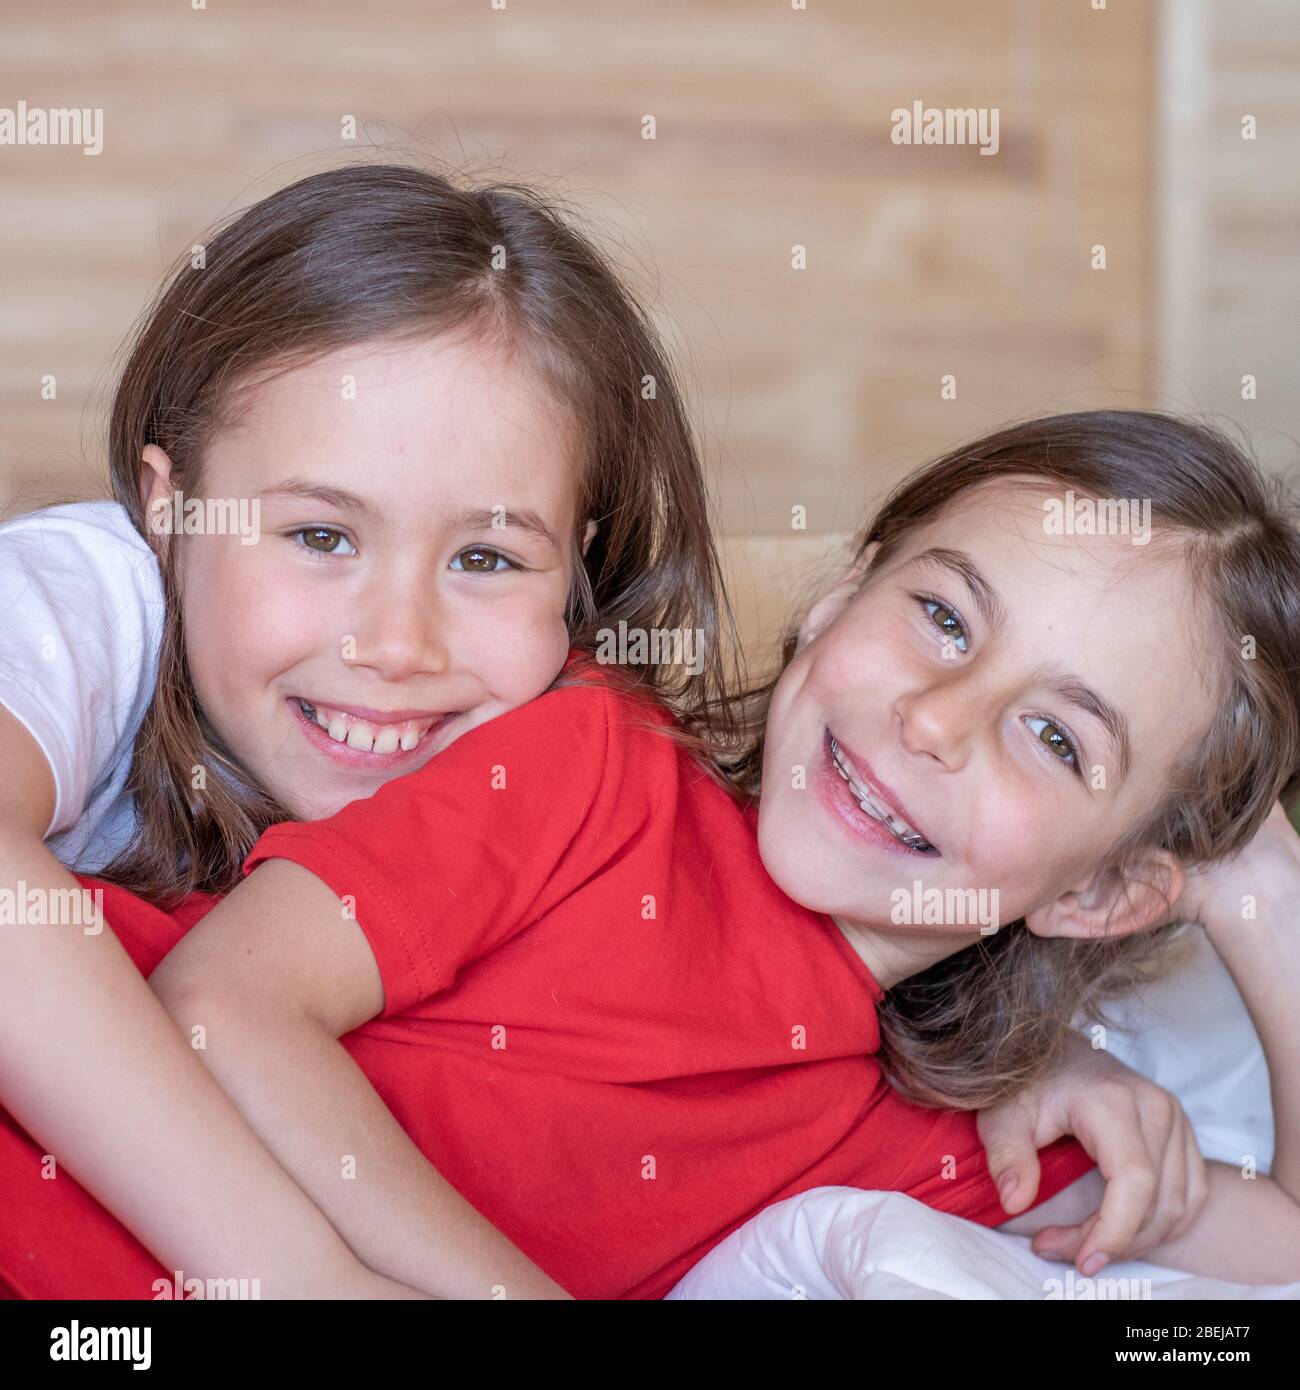 The children woke up early in the morning in their beds. pajama party Stock Photo